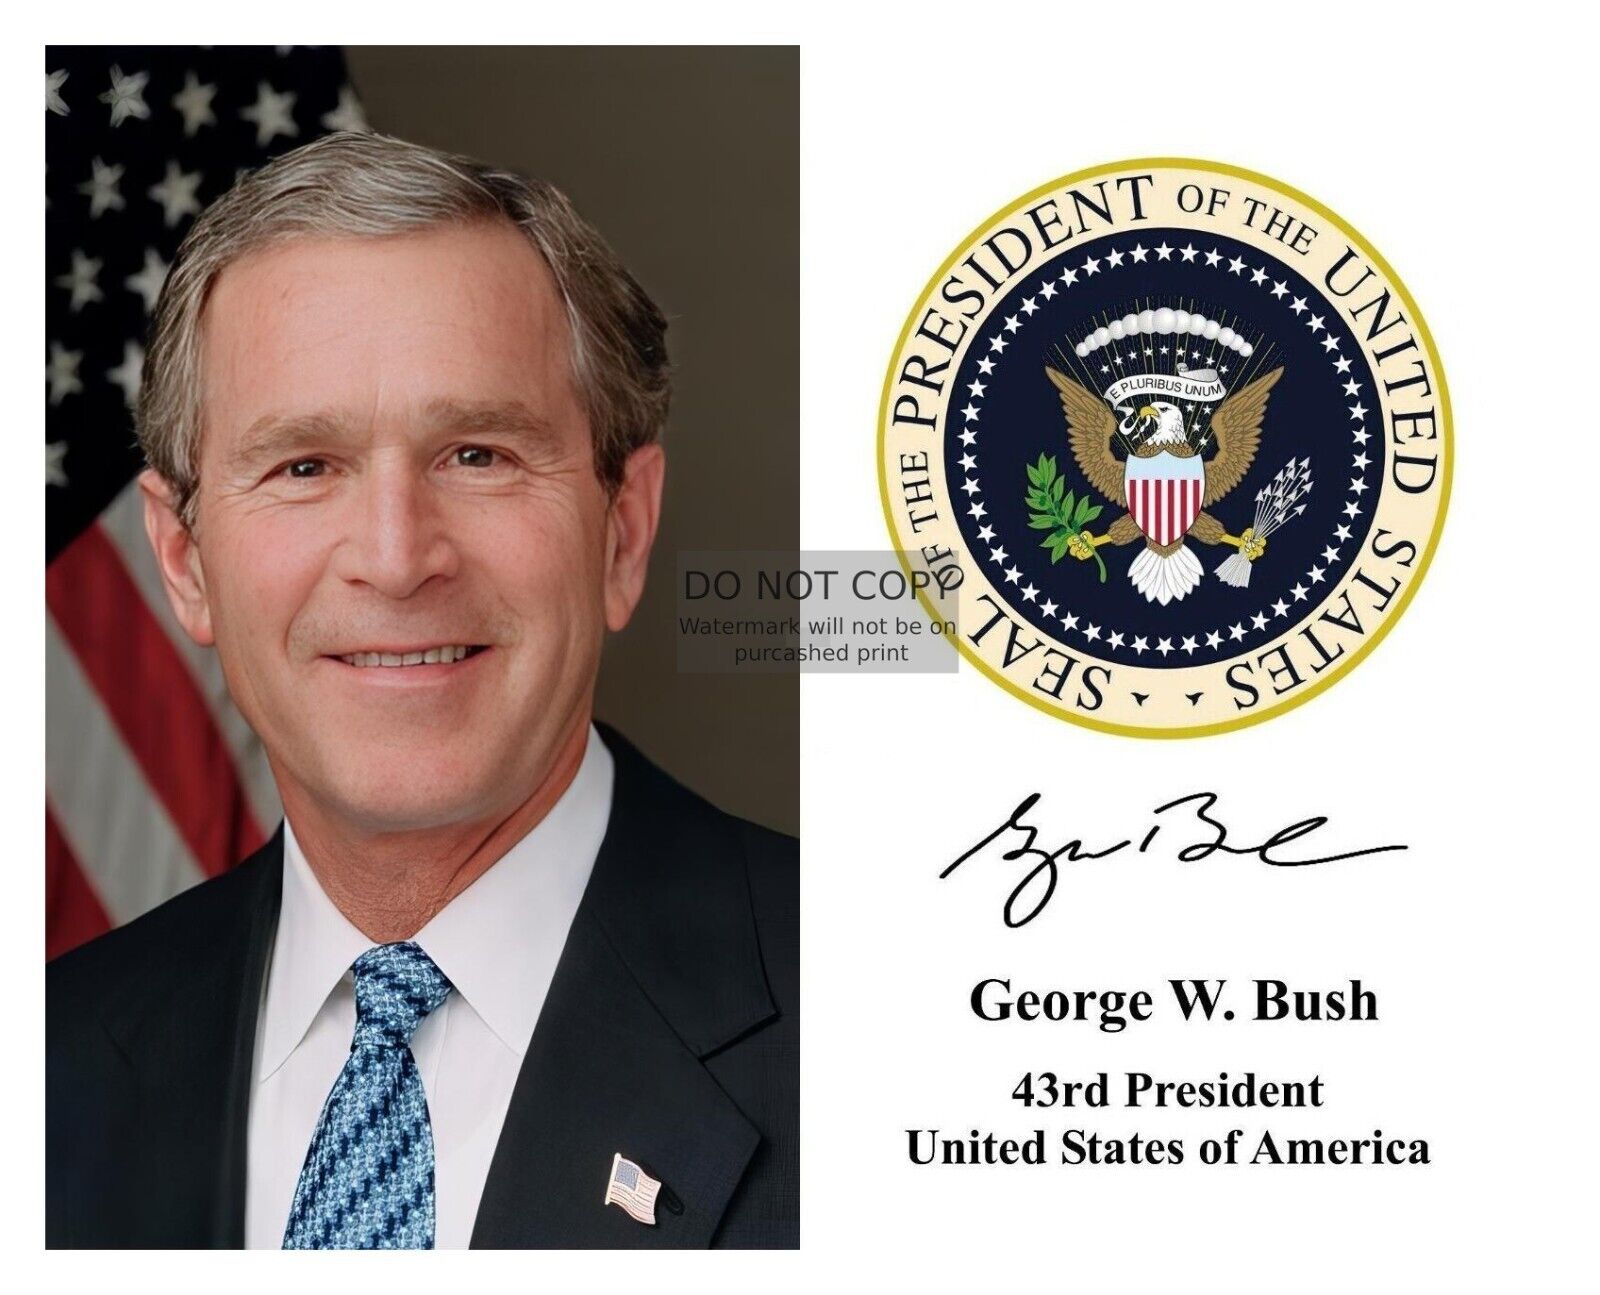 PRESIDENT GEORGE W. BUSH PRESIDENTIAL SEAL AUTOGRAPHED 8X10 PHOTOGRAPH